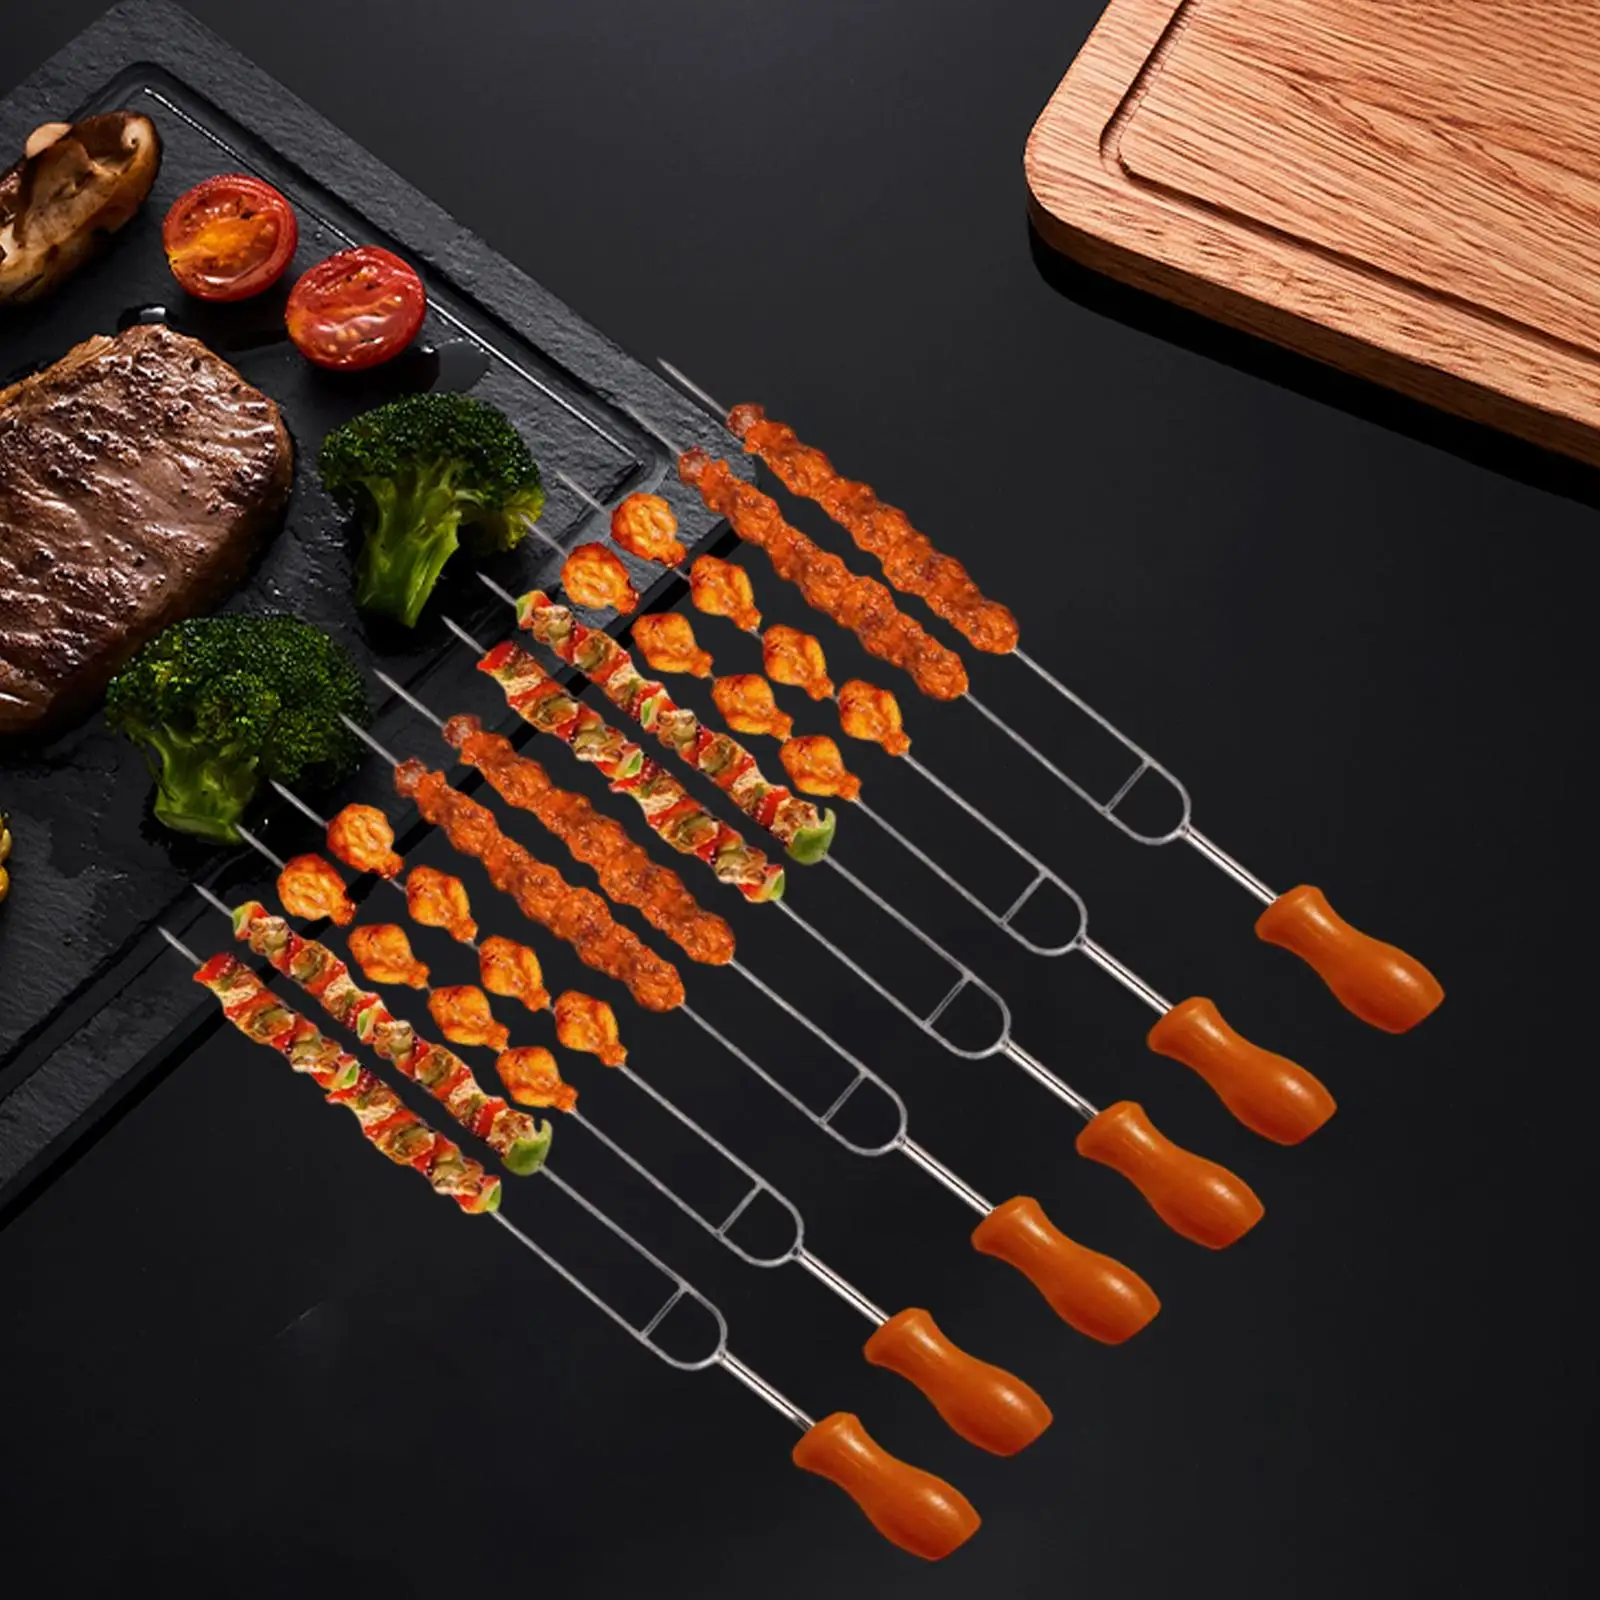 6x Roasting Sticks BBQ Skewers Barbecue Forks Camping Fork Campfire Fork with Storage Bag for Party Picnic Camping Campfire